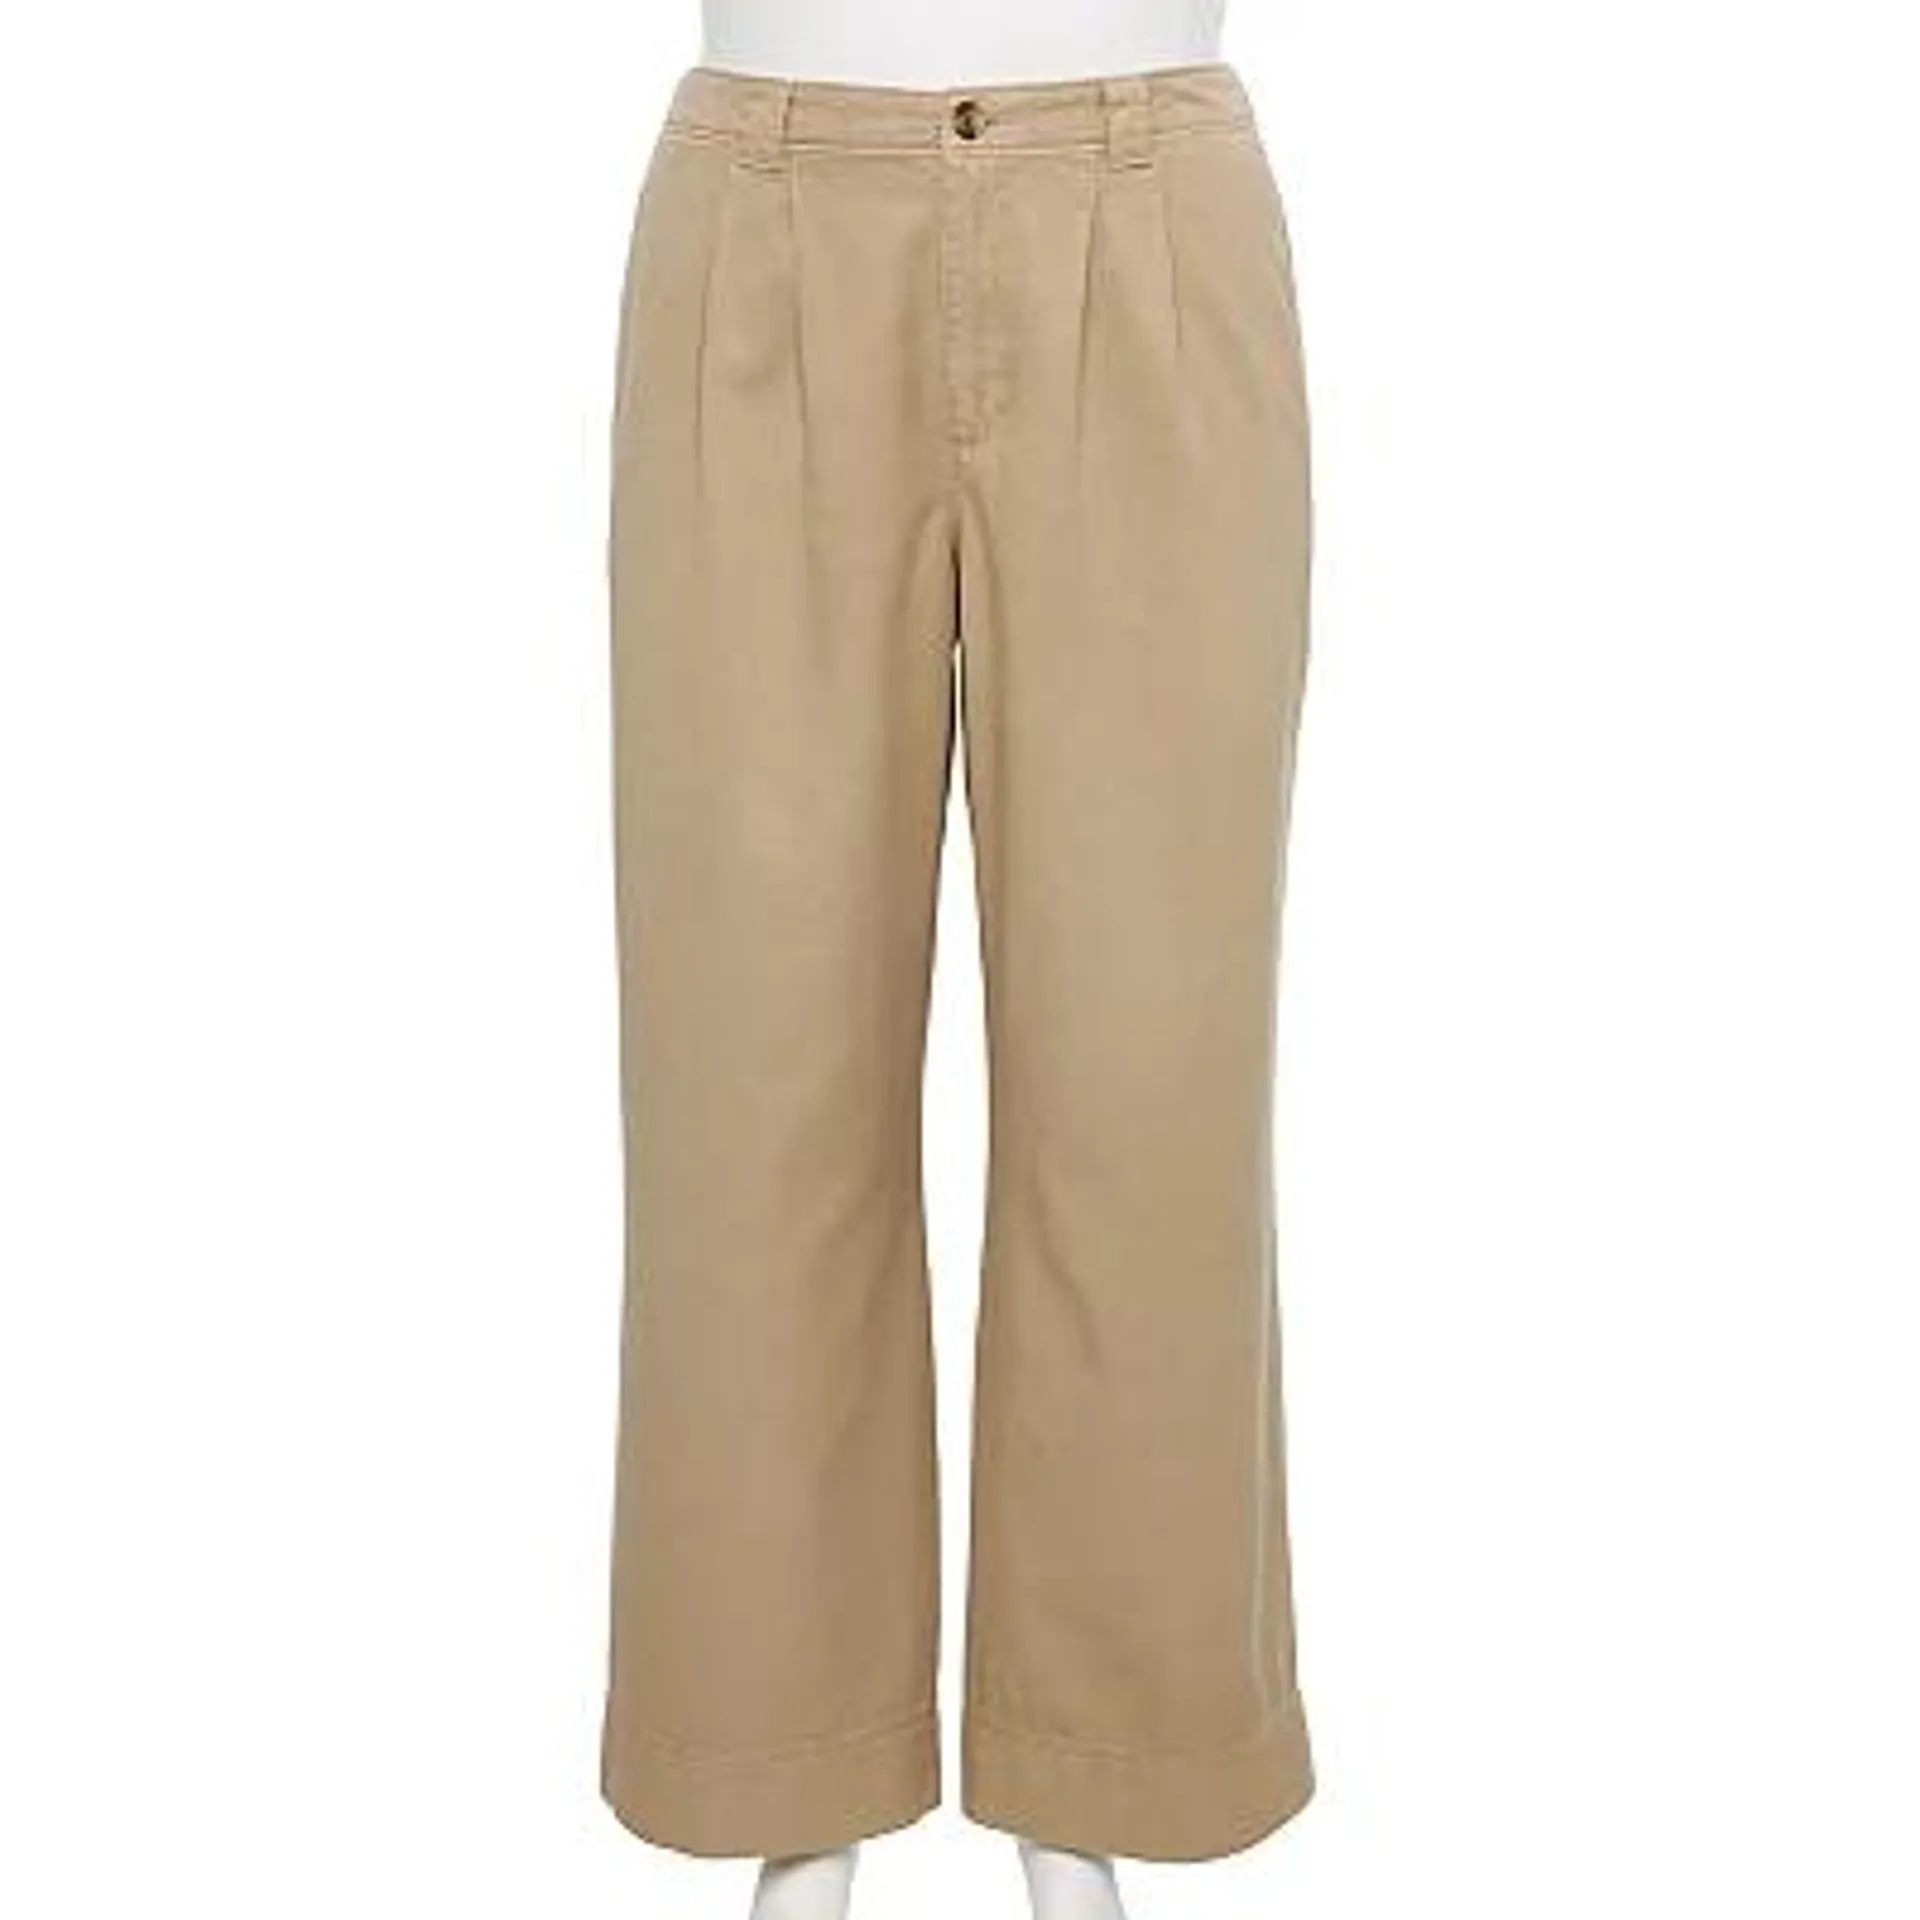 Plus Size Sonoma Goods For Life® Pleated Wide Leg Pants